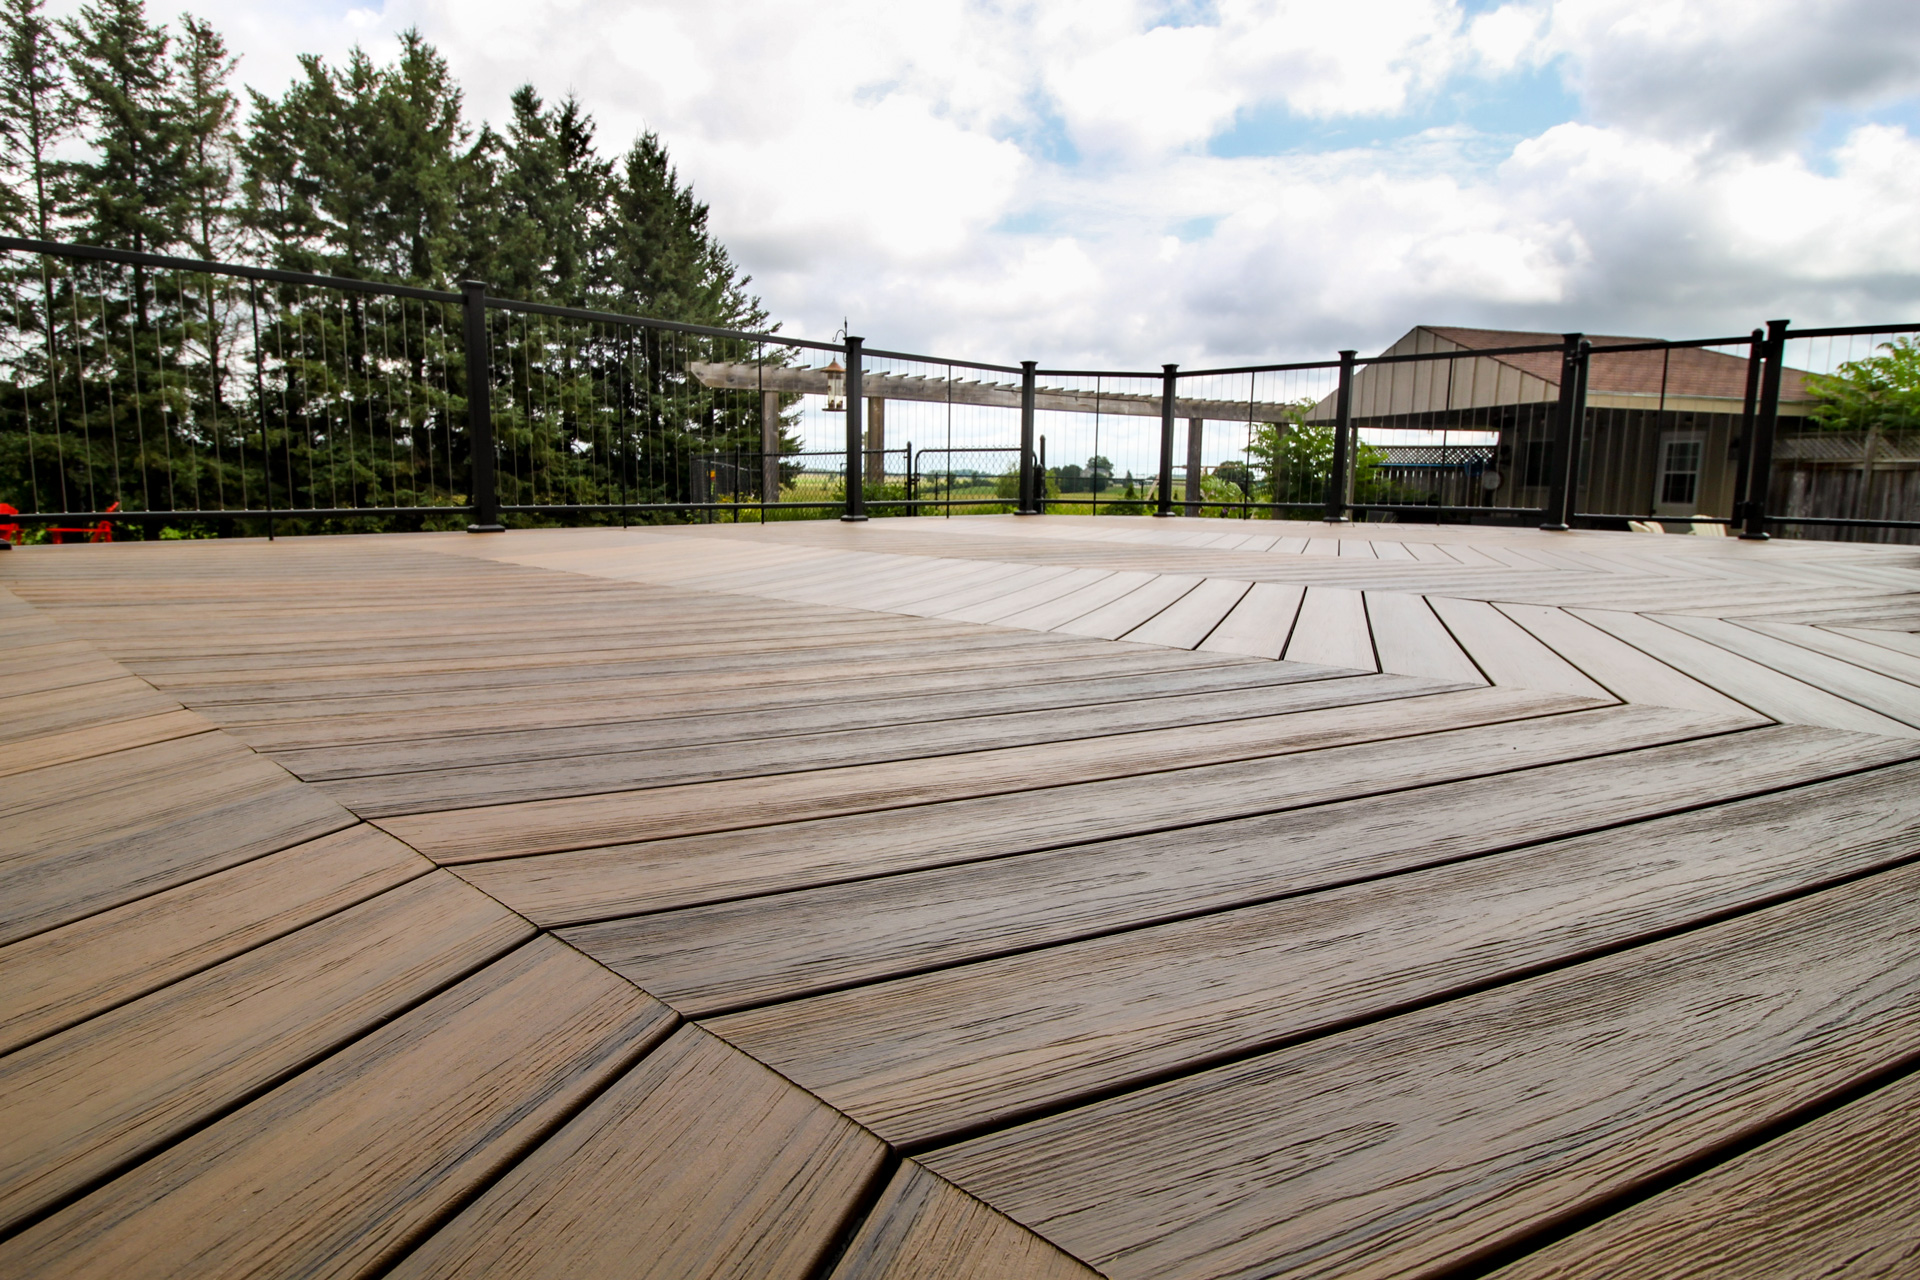 Close up view of composite decking with cable railing on the perimeter with tall trees in the background. 